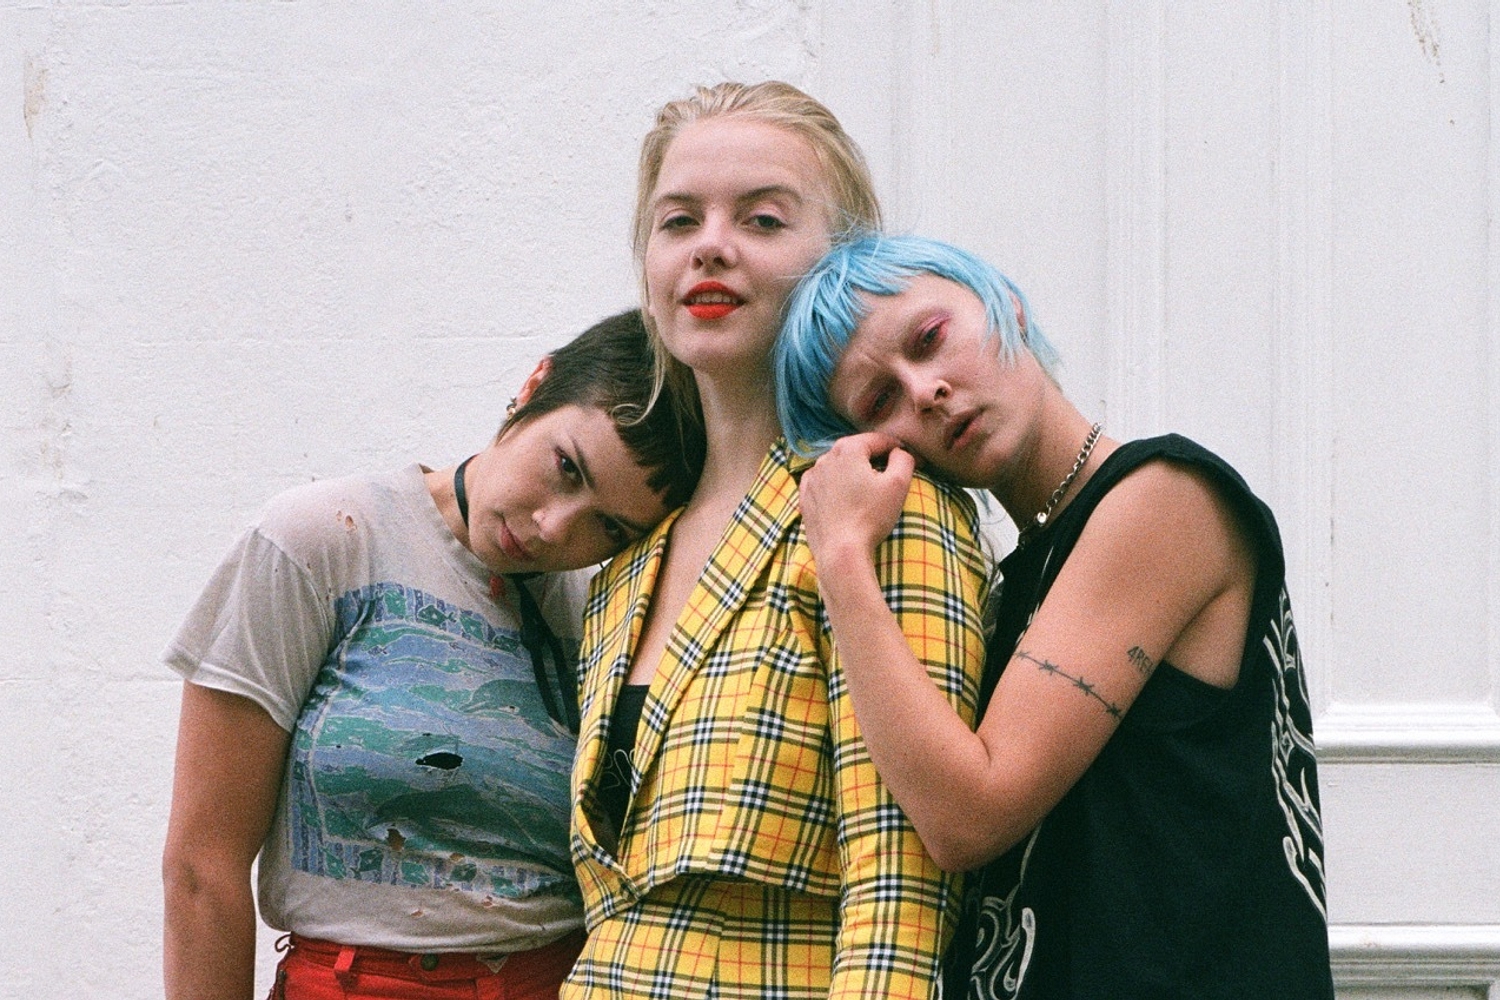 Dream Wife are looking for female and non-binary artists to support them on their upcoming tour